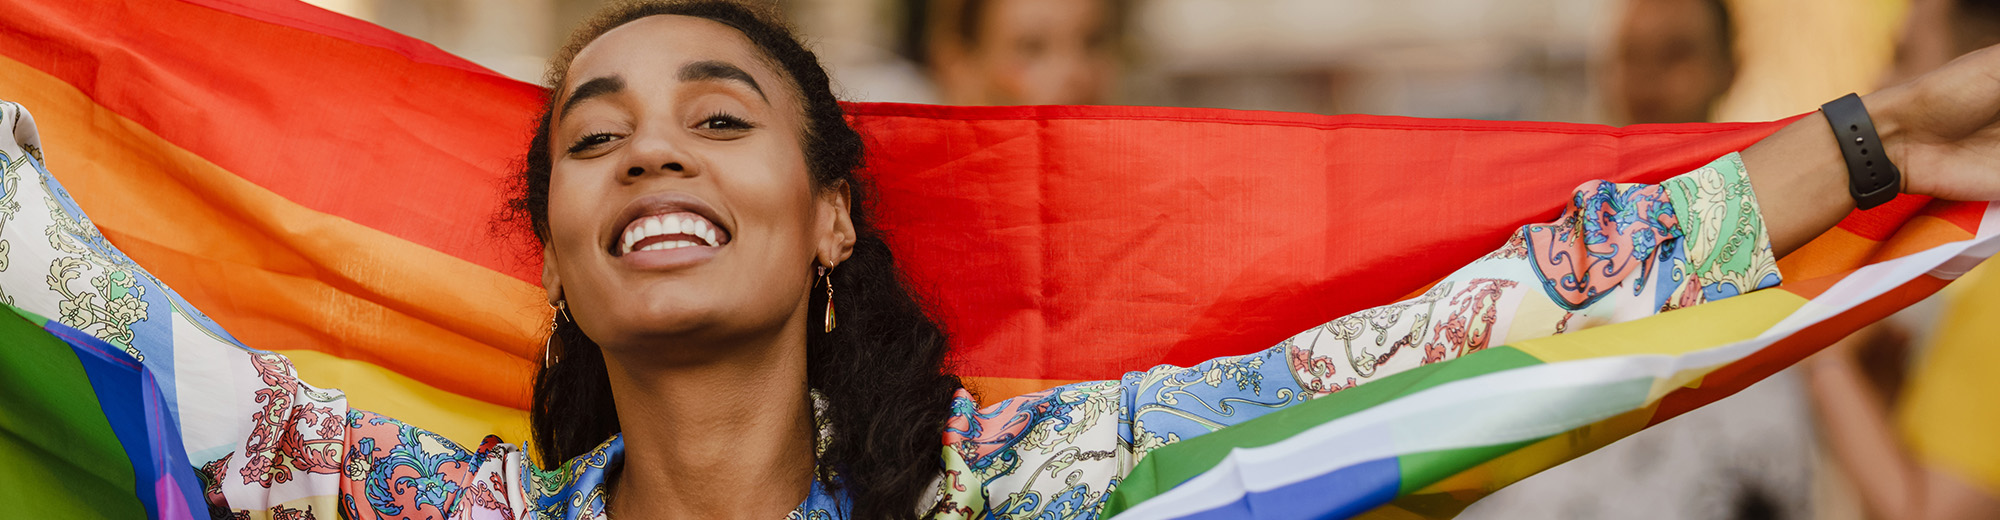 Black woman smiling and holding rainbow flag during pride parade